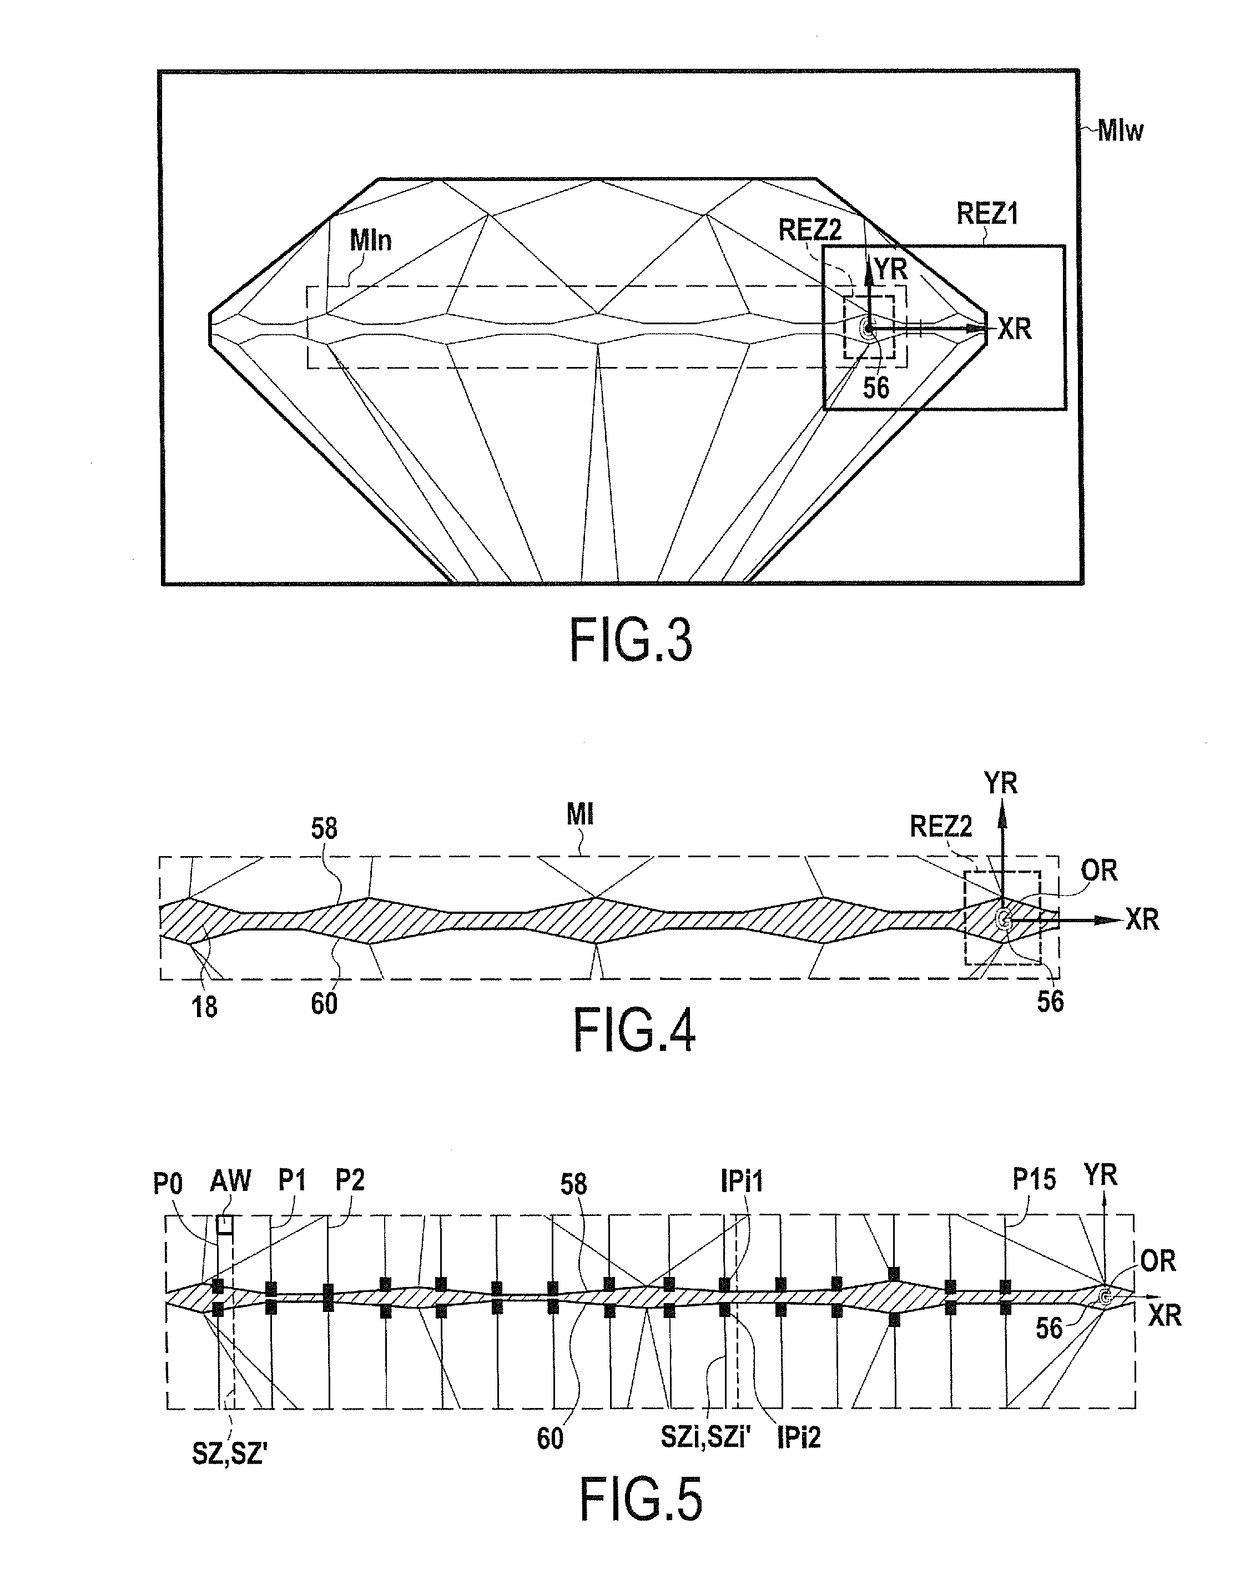 Method for computing a unique identifier for a gemstone having facets